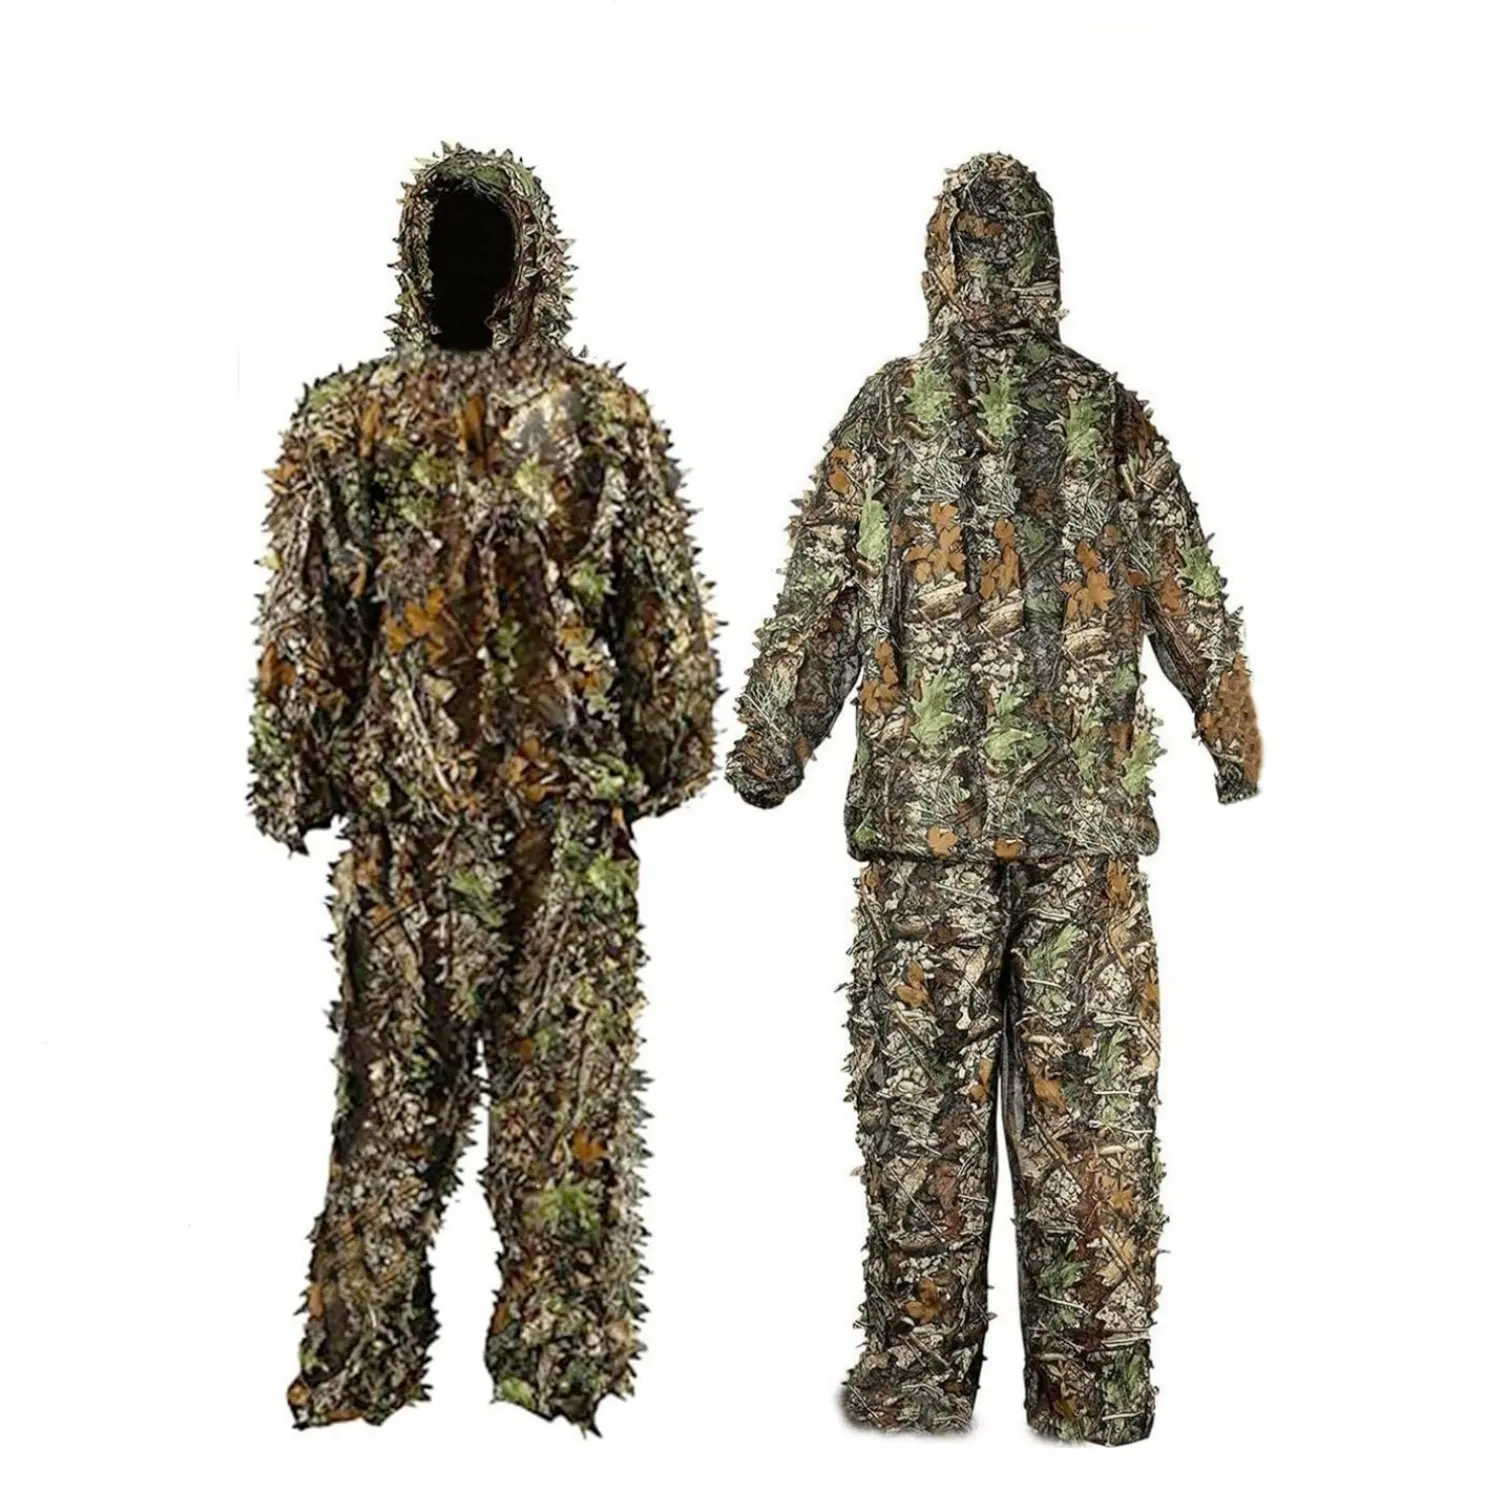 Ghillie Suits 3D Lightweight Hunting Camo Clothing Woodland Tactical Gilly Gillies Apparel for Hunting Wildlife Camouflage Suit